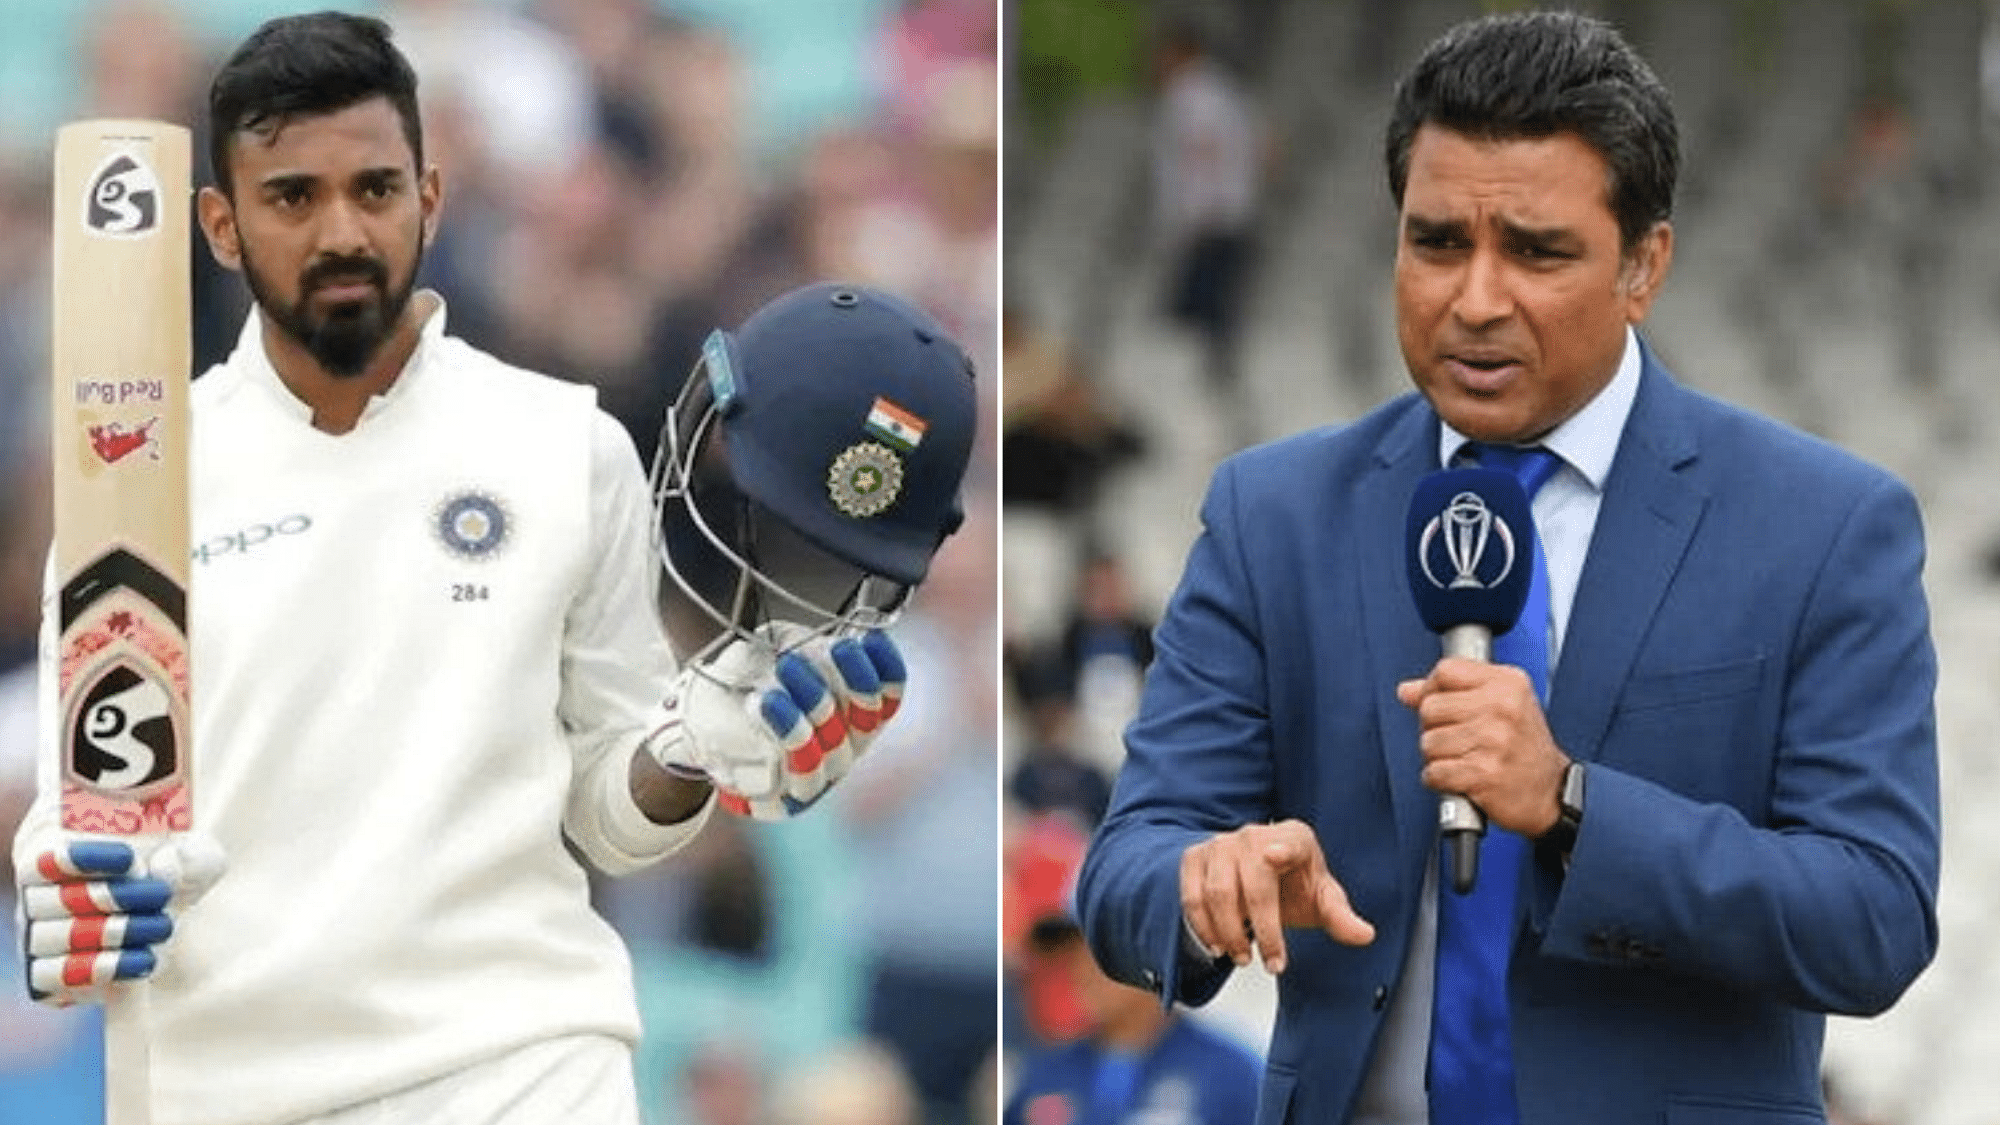 Sanjay Manjrekar said that Rahul’s selection in Test Matches based on his IPL form is demotivating for players performing well in Domestic Cricket.